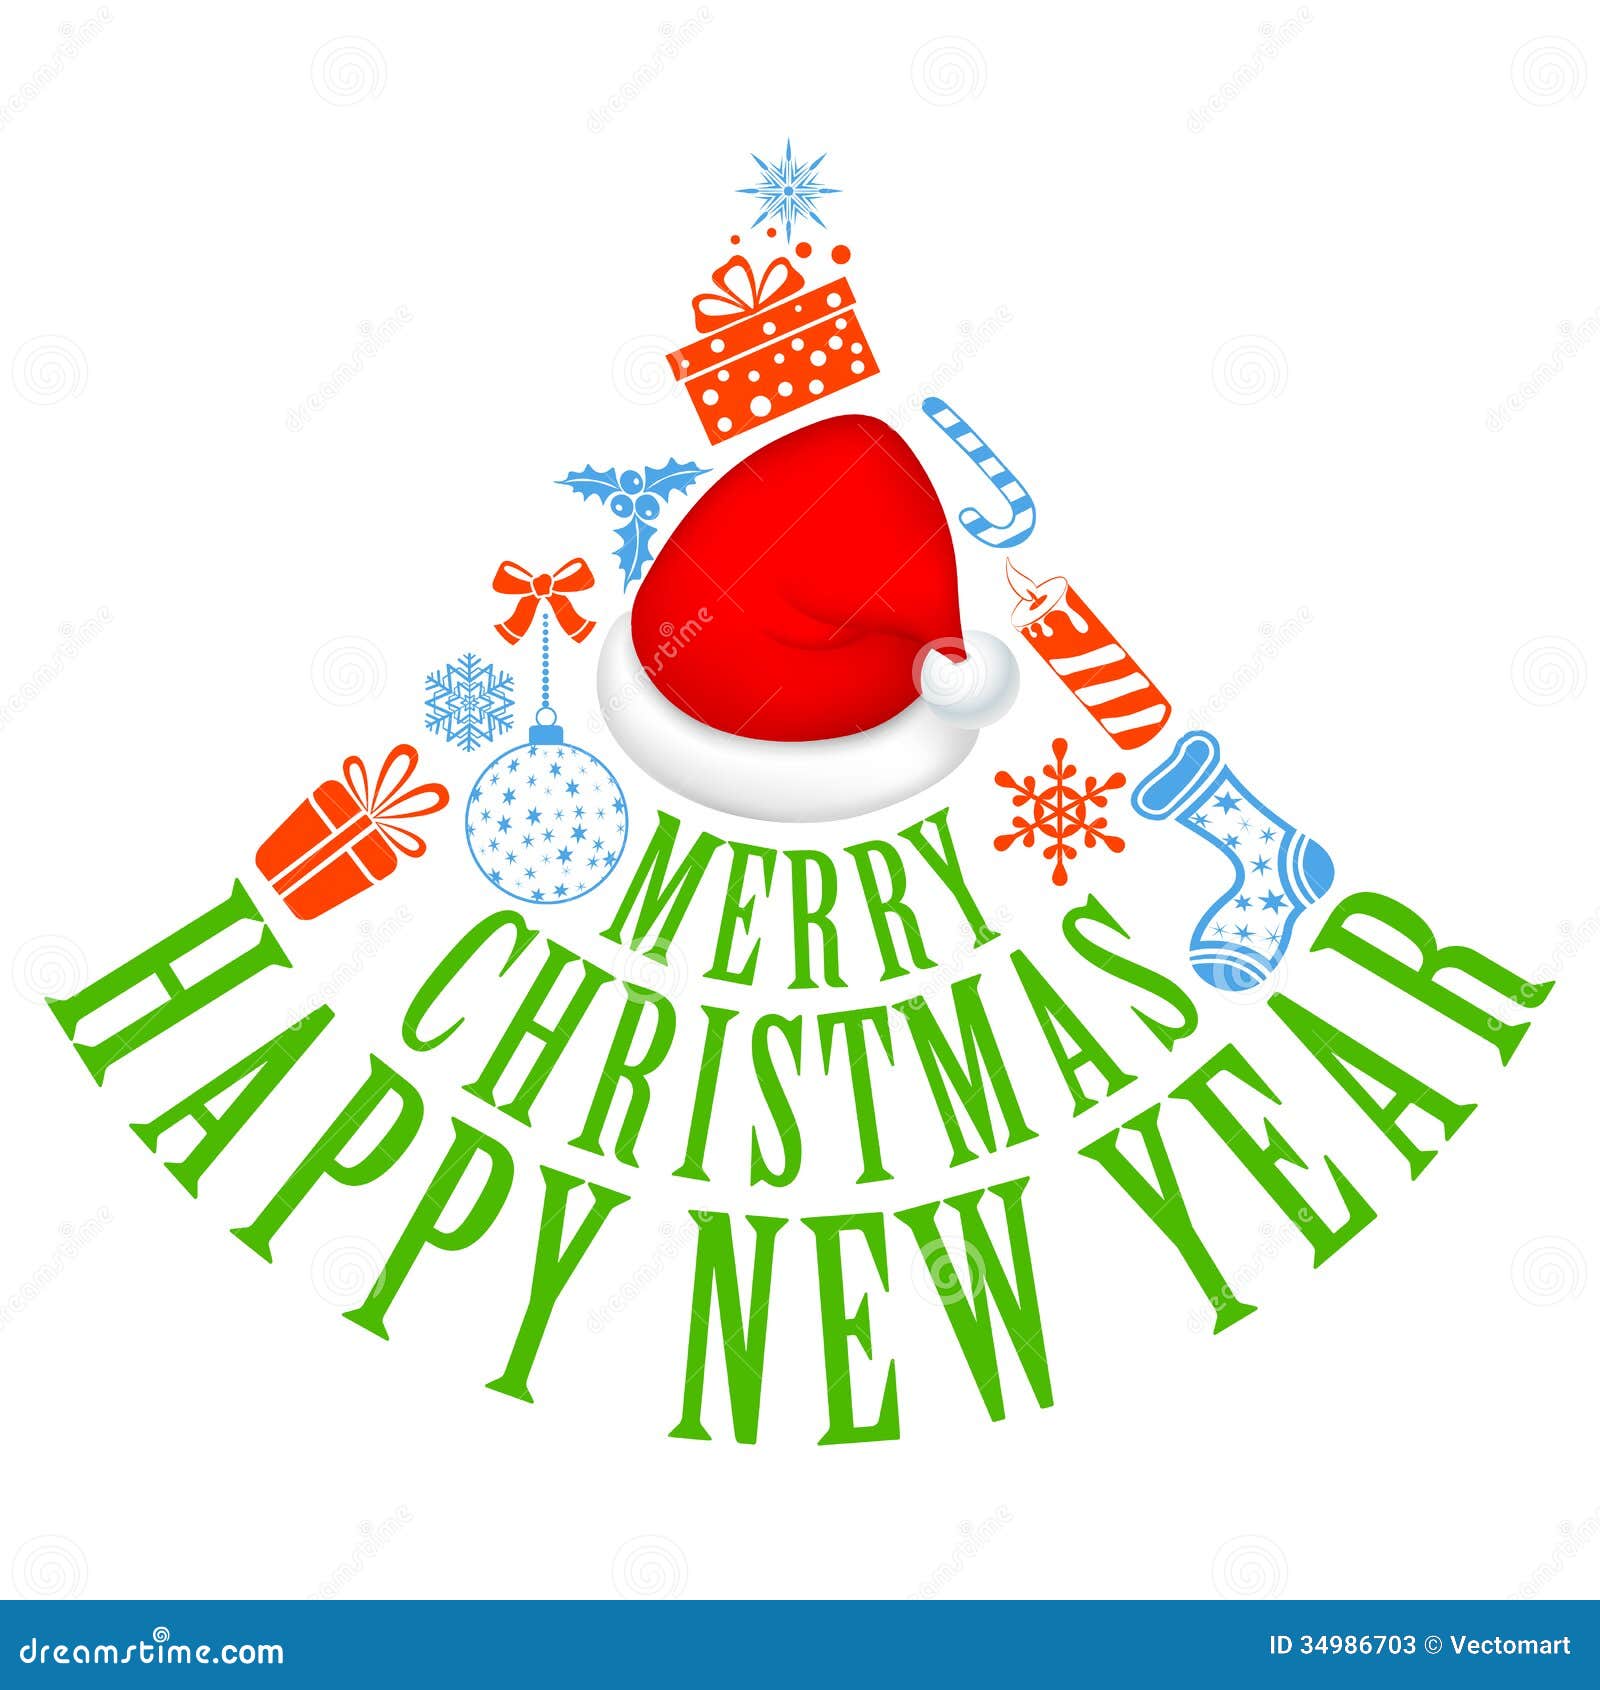 clipart merry christmas happy new year - photo #18